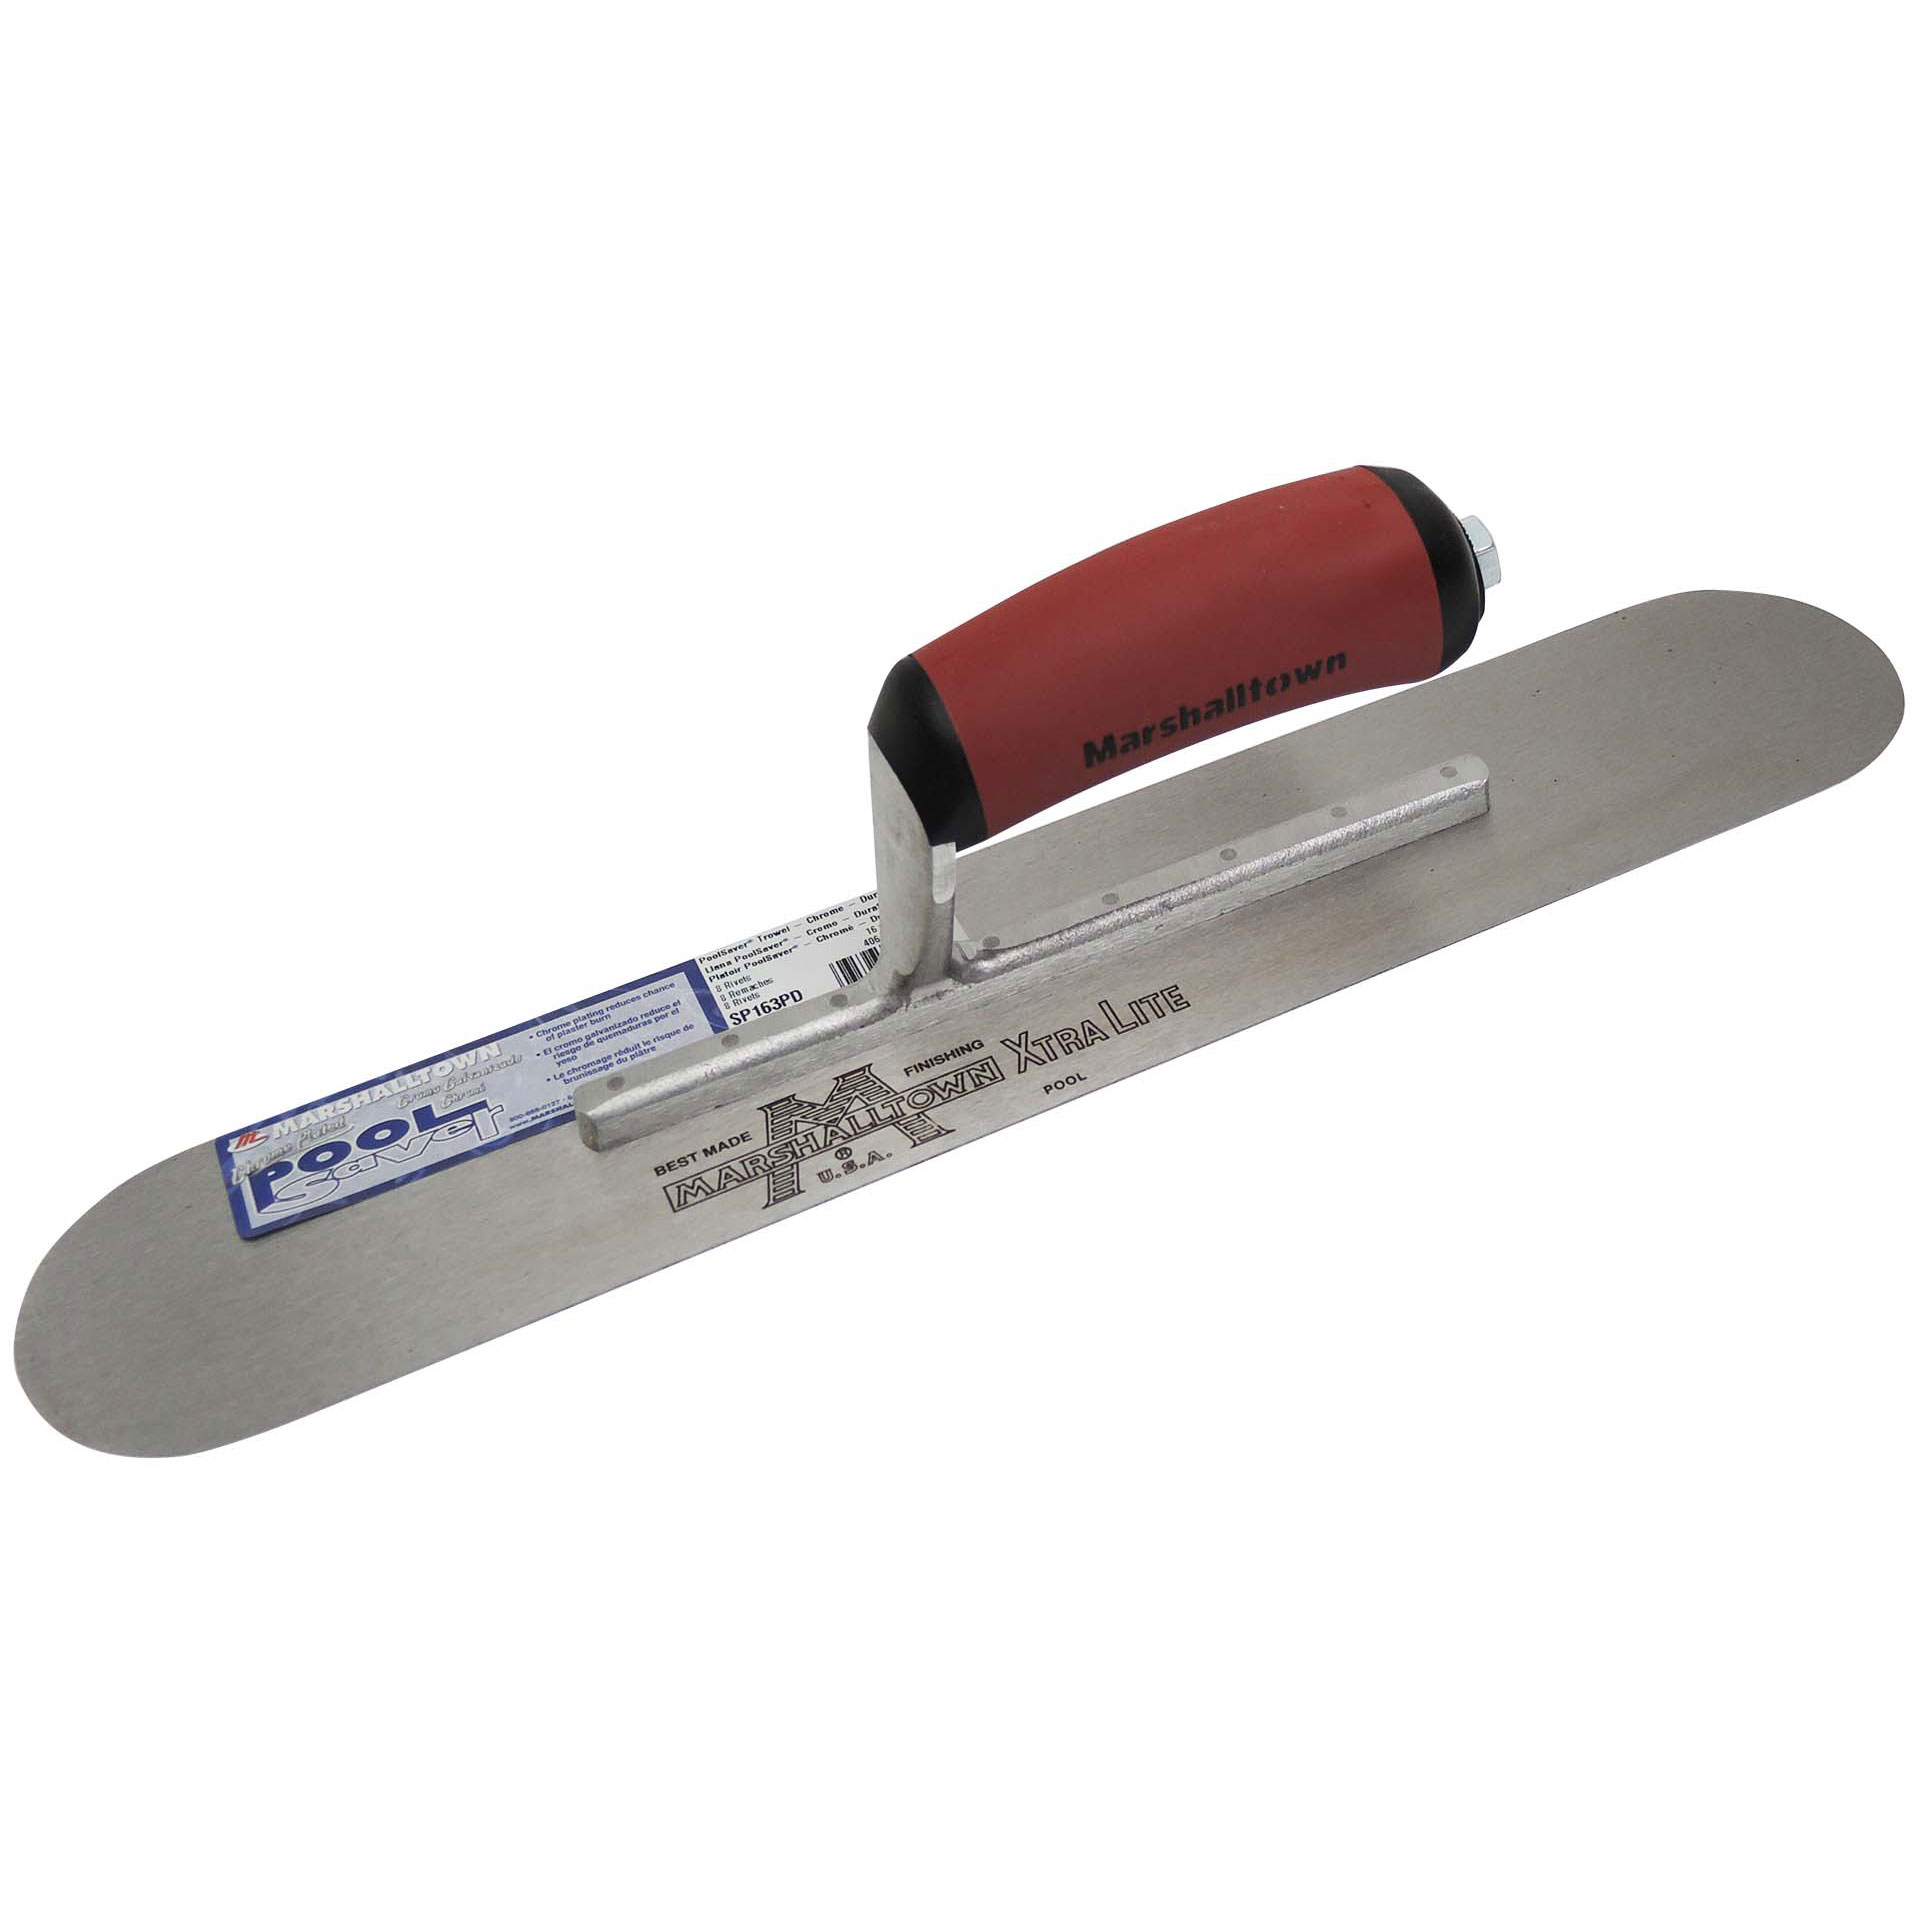 Marshalltown SP163PD 16in x 3in PoolSaver Trowel with DuraSoft Handle SP163PD